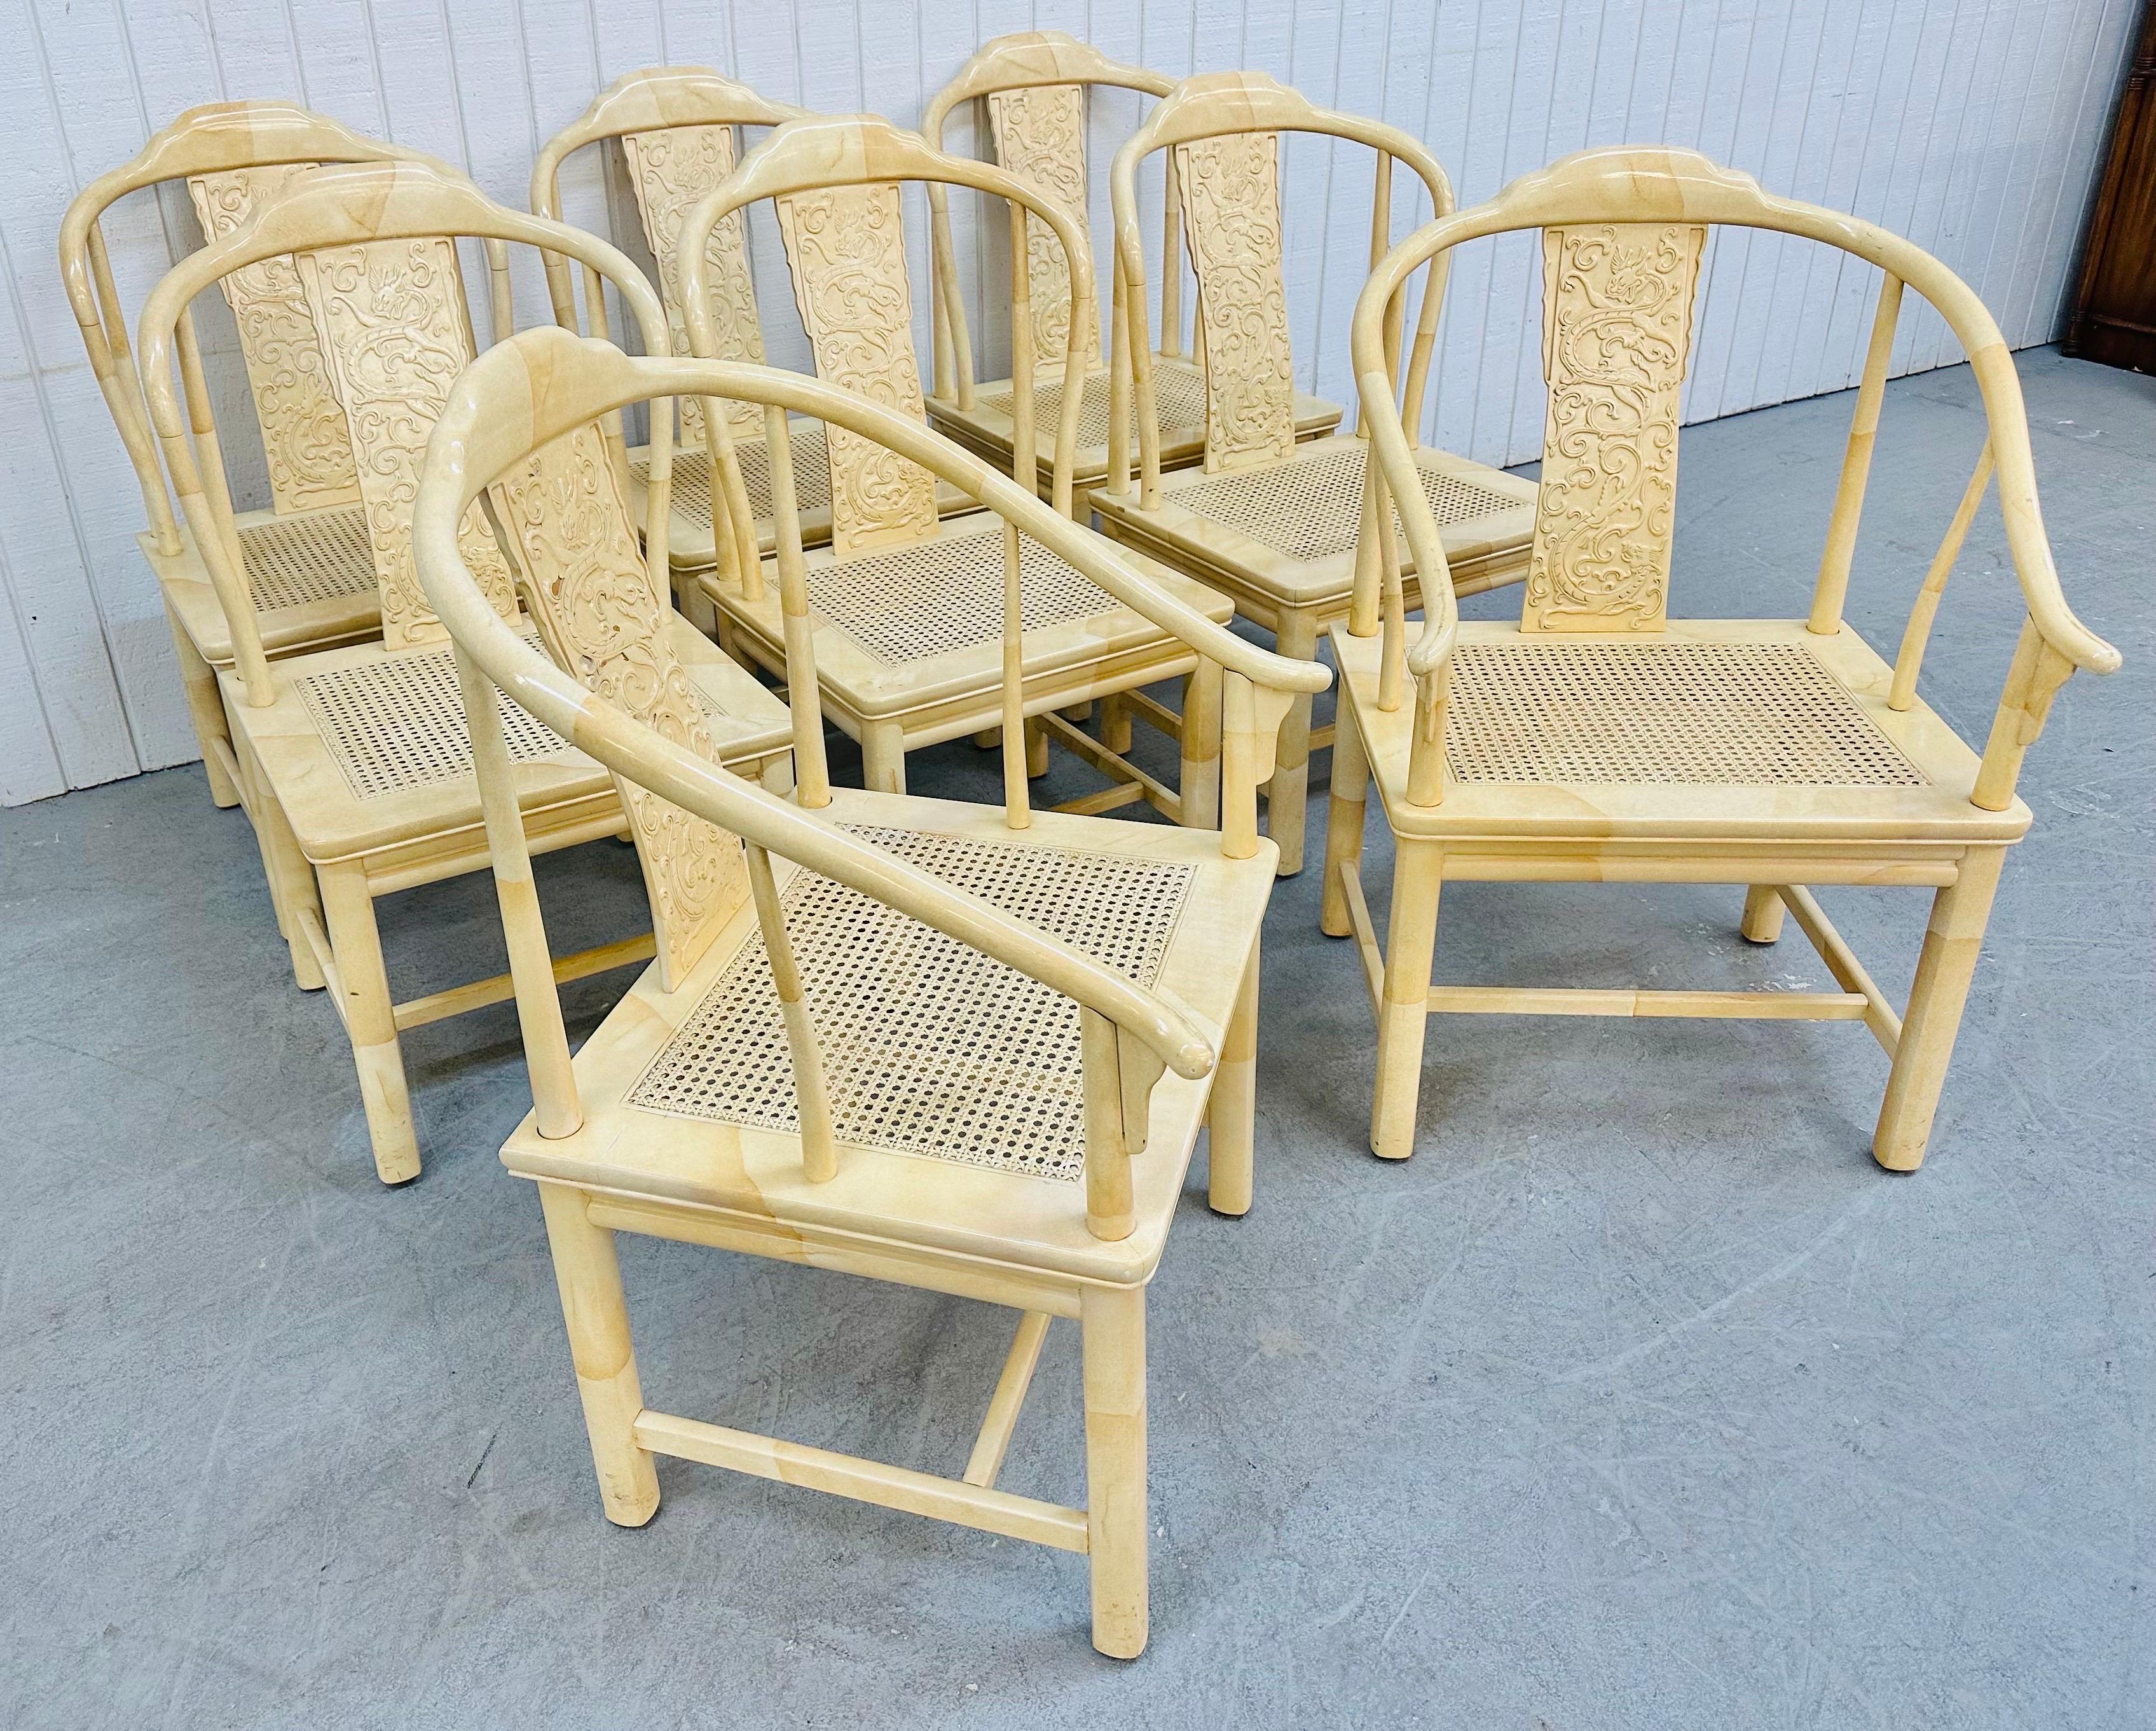 This listing is for a set of eight vintage Henredon Ivory Lacquered Dining Chairs. Featuring two arm chairs, six straight chairs, Asian inspired design, cane seats, and lacquered finish. This is an exceptional combination of quality and design by